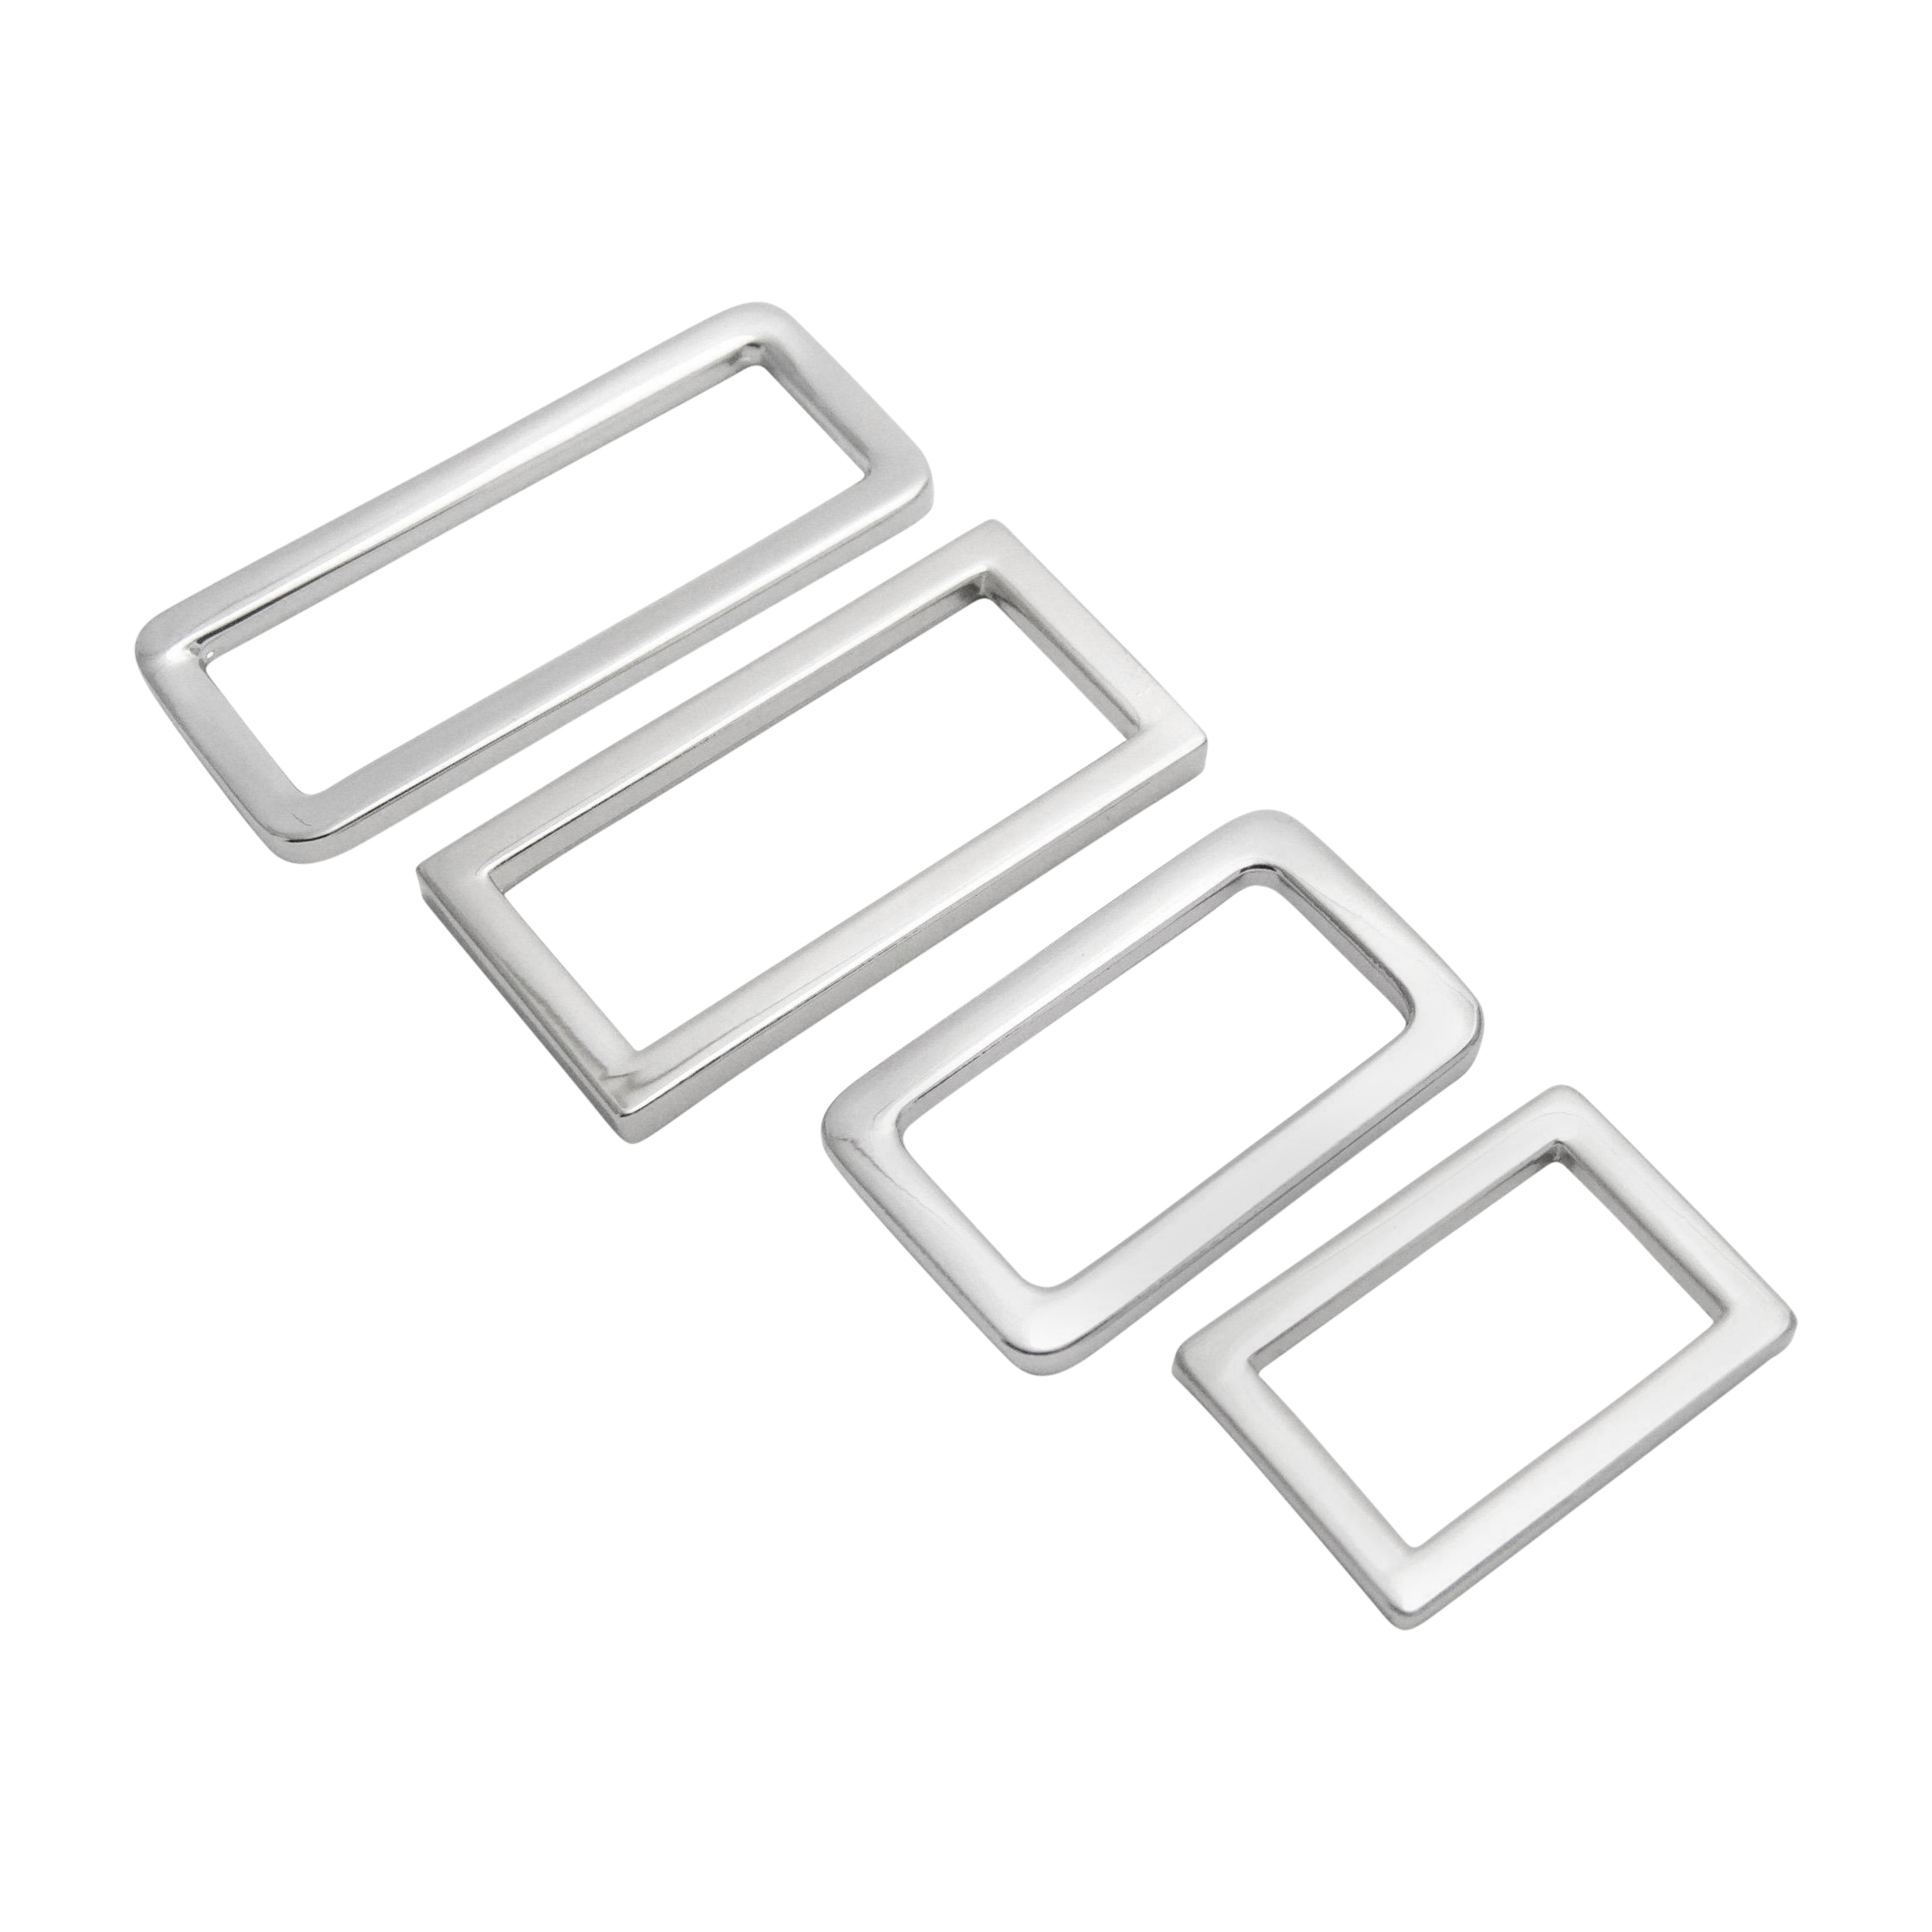 Silver rectangle rings in 3 widths, 1" (25mm), 1 1/4" (32mm) and 1 1/2" (38mm), use these as connectors to attach bag handles